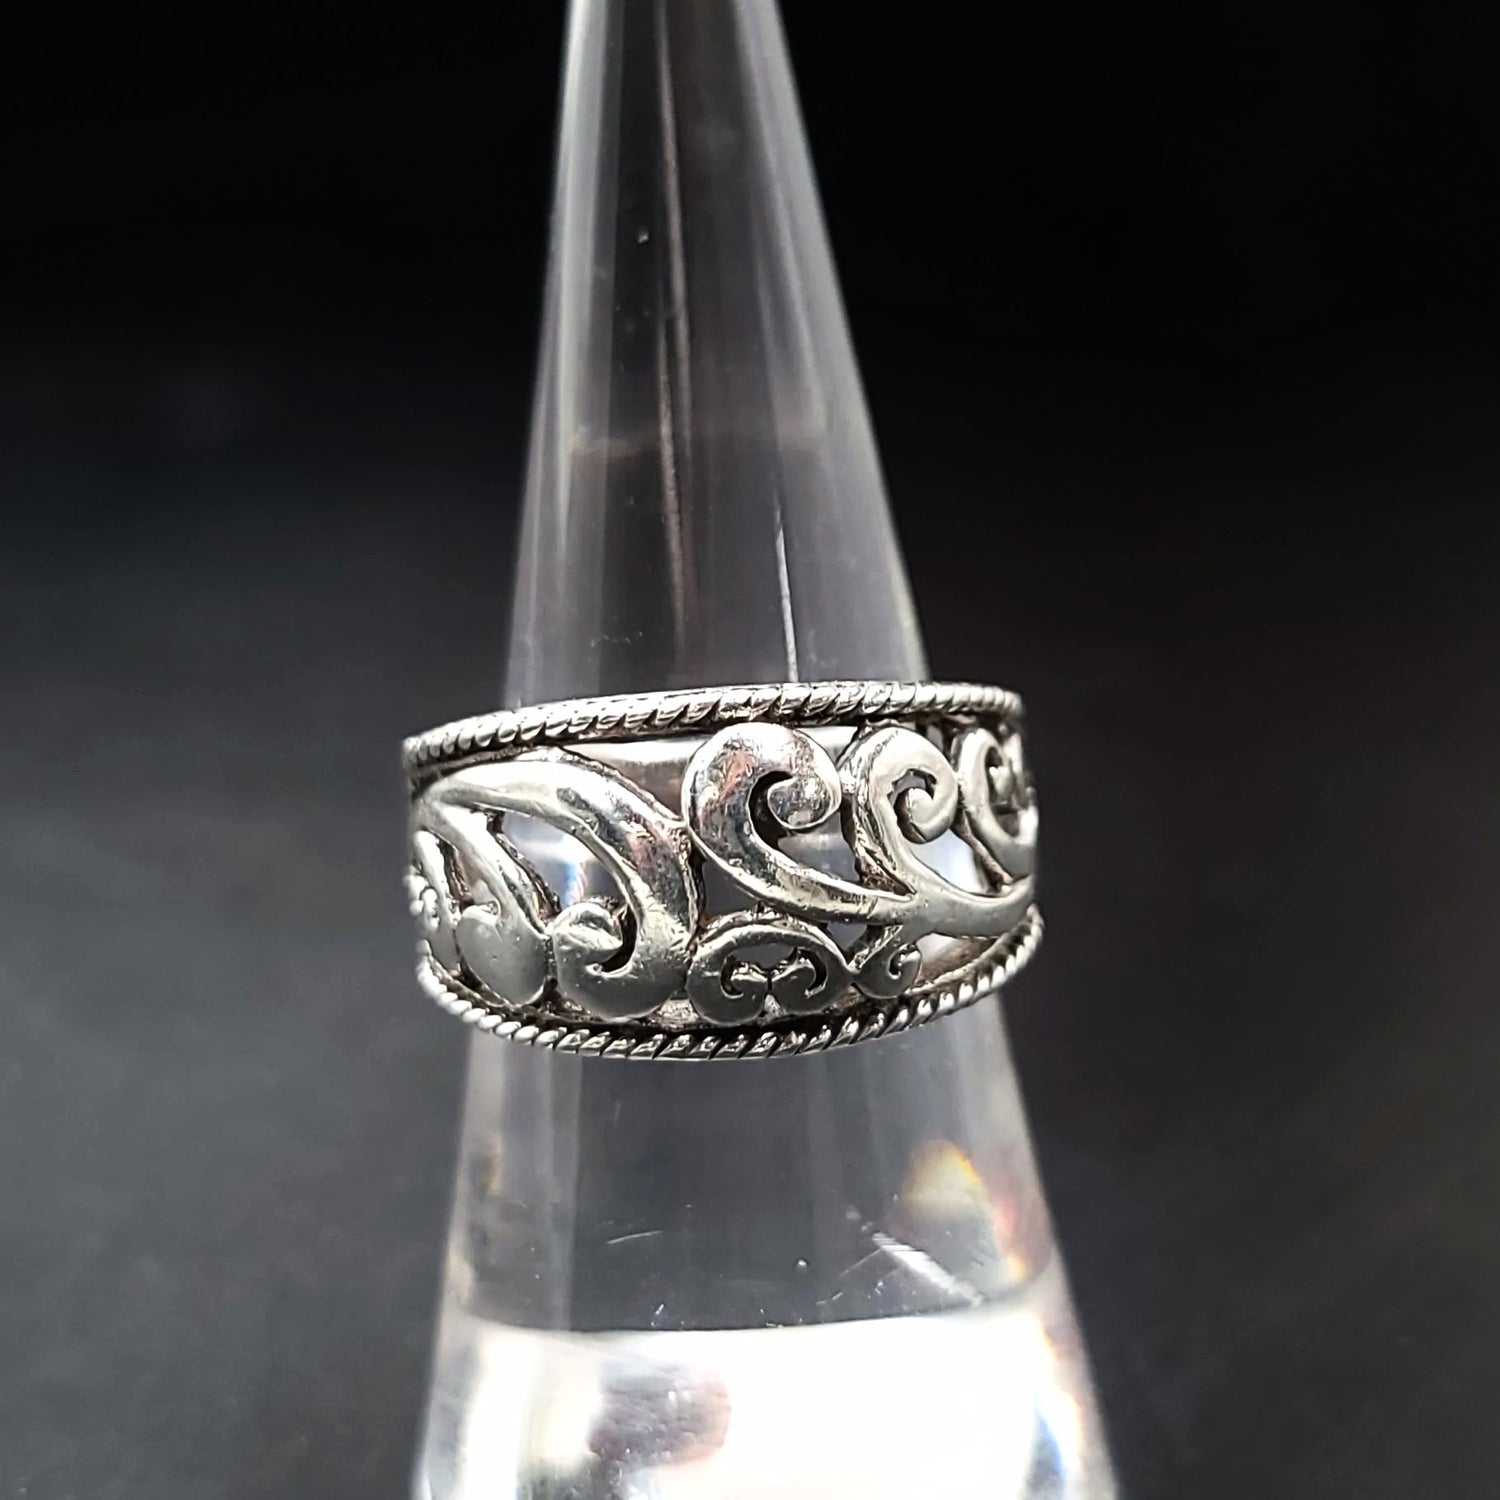 Filigree Free Form Ring Sterling Silver Band - Elevated Metaphysical